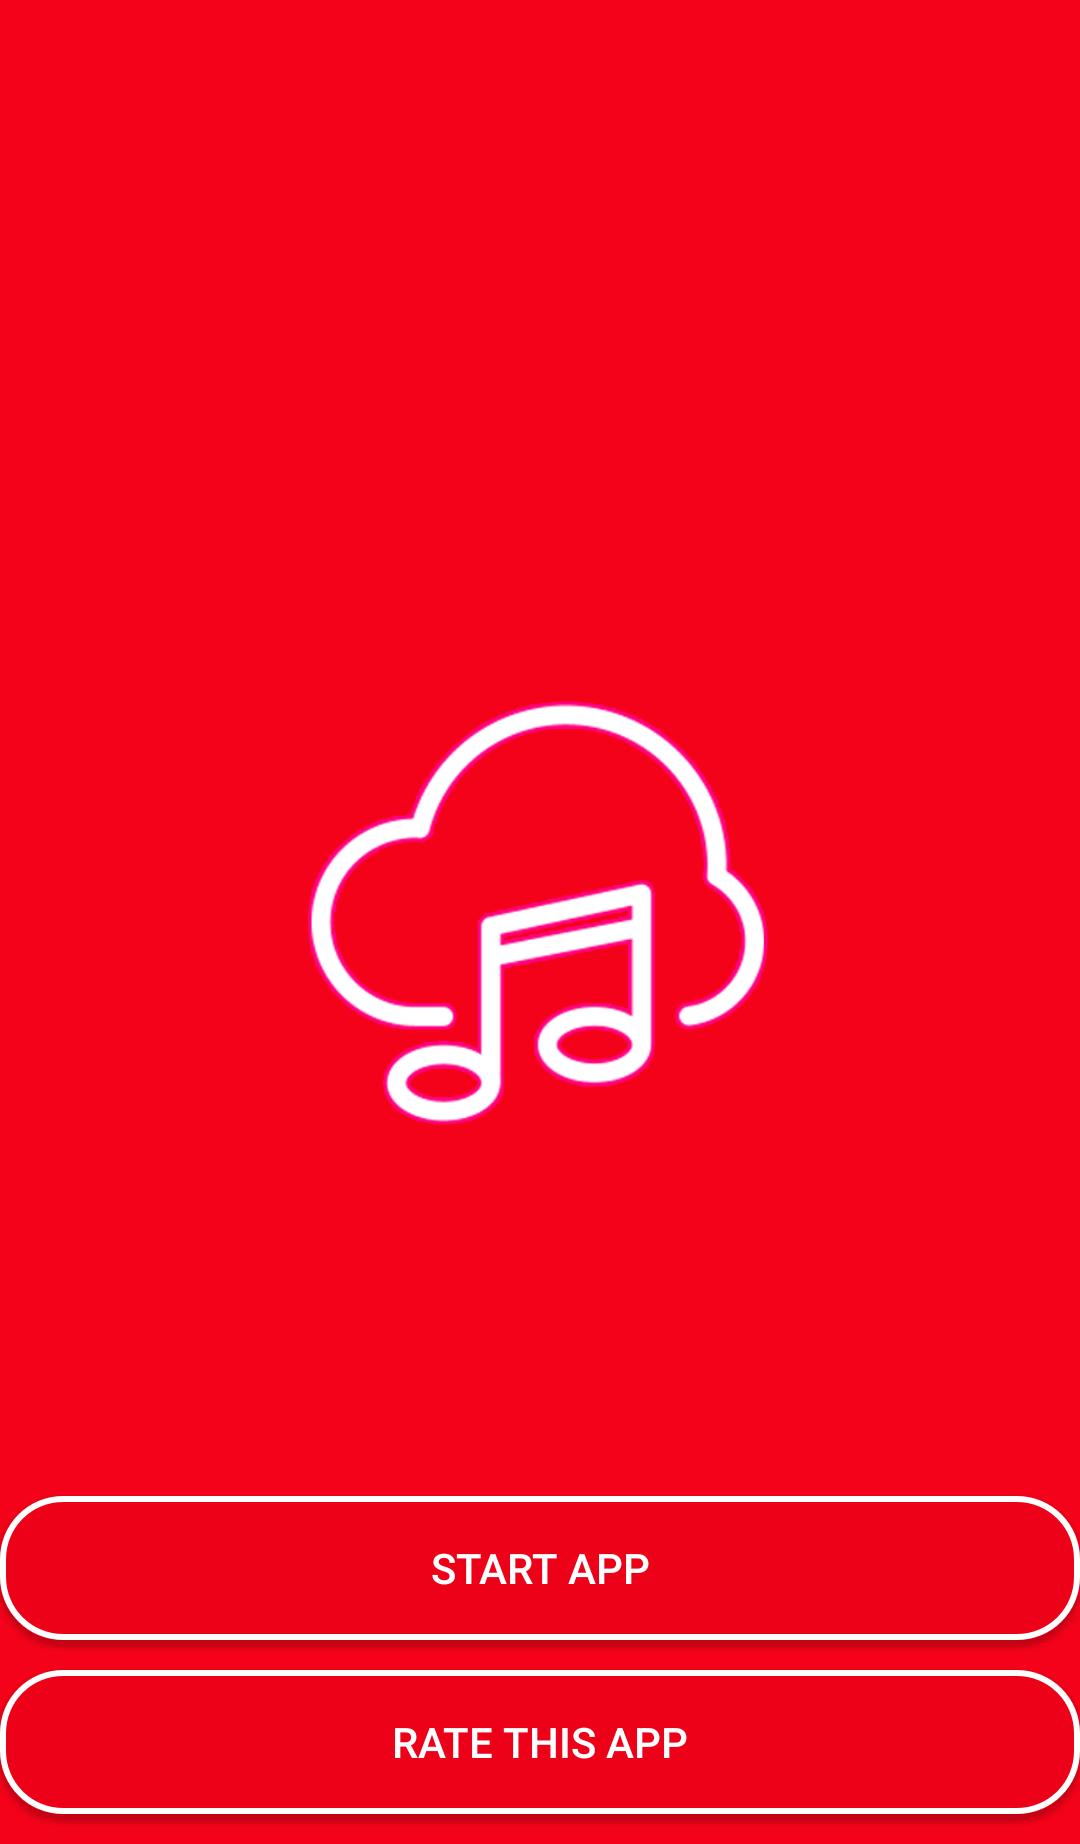 Jos MP3 Juice Free Music Player for Android - APK Download